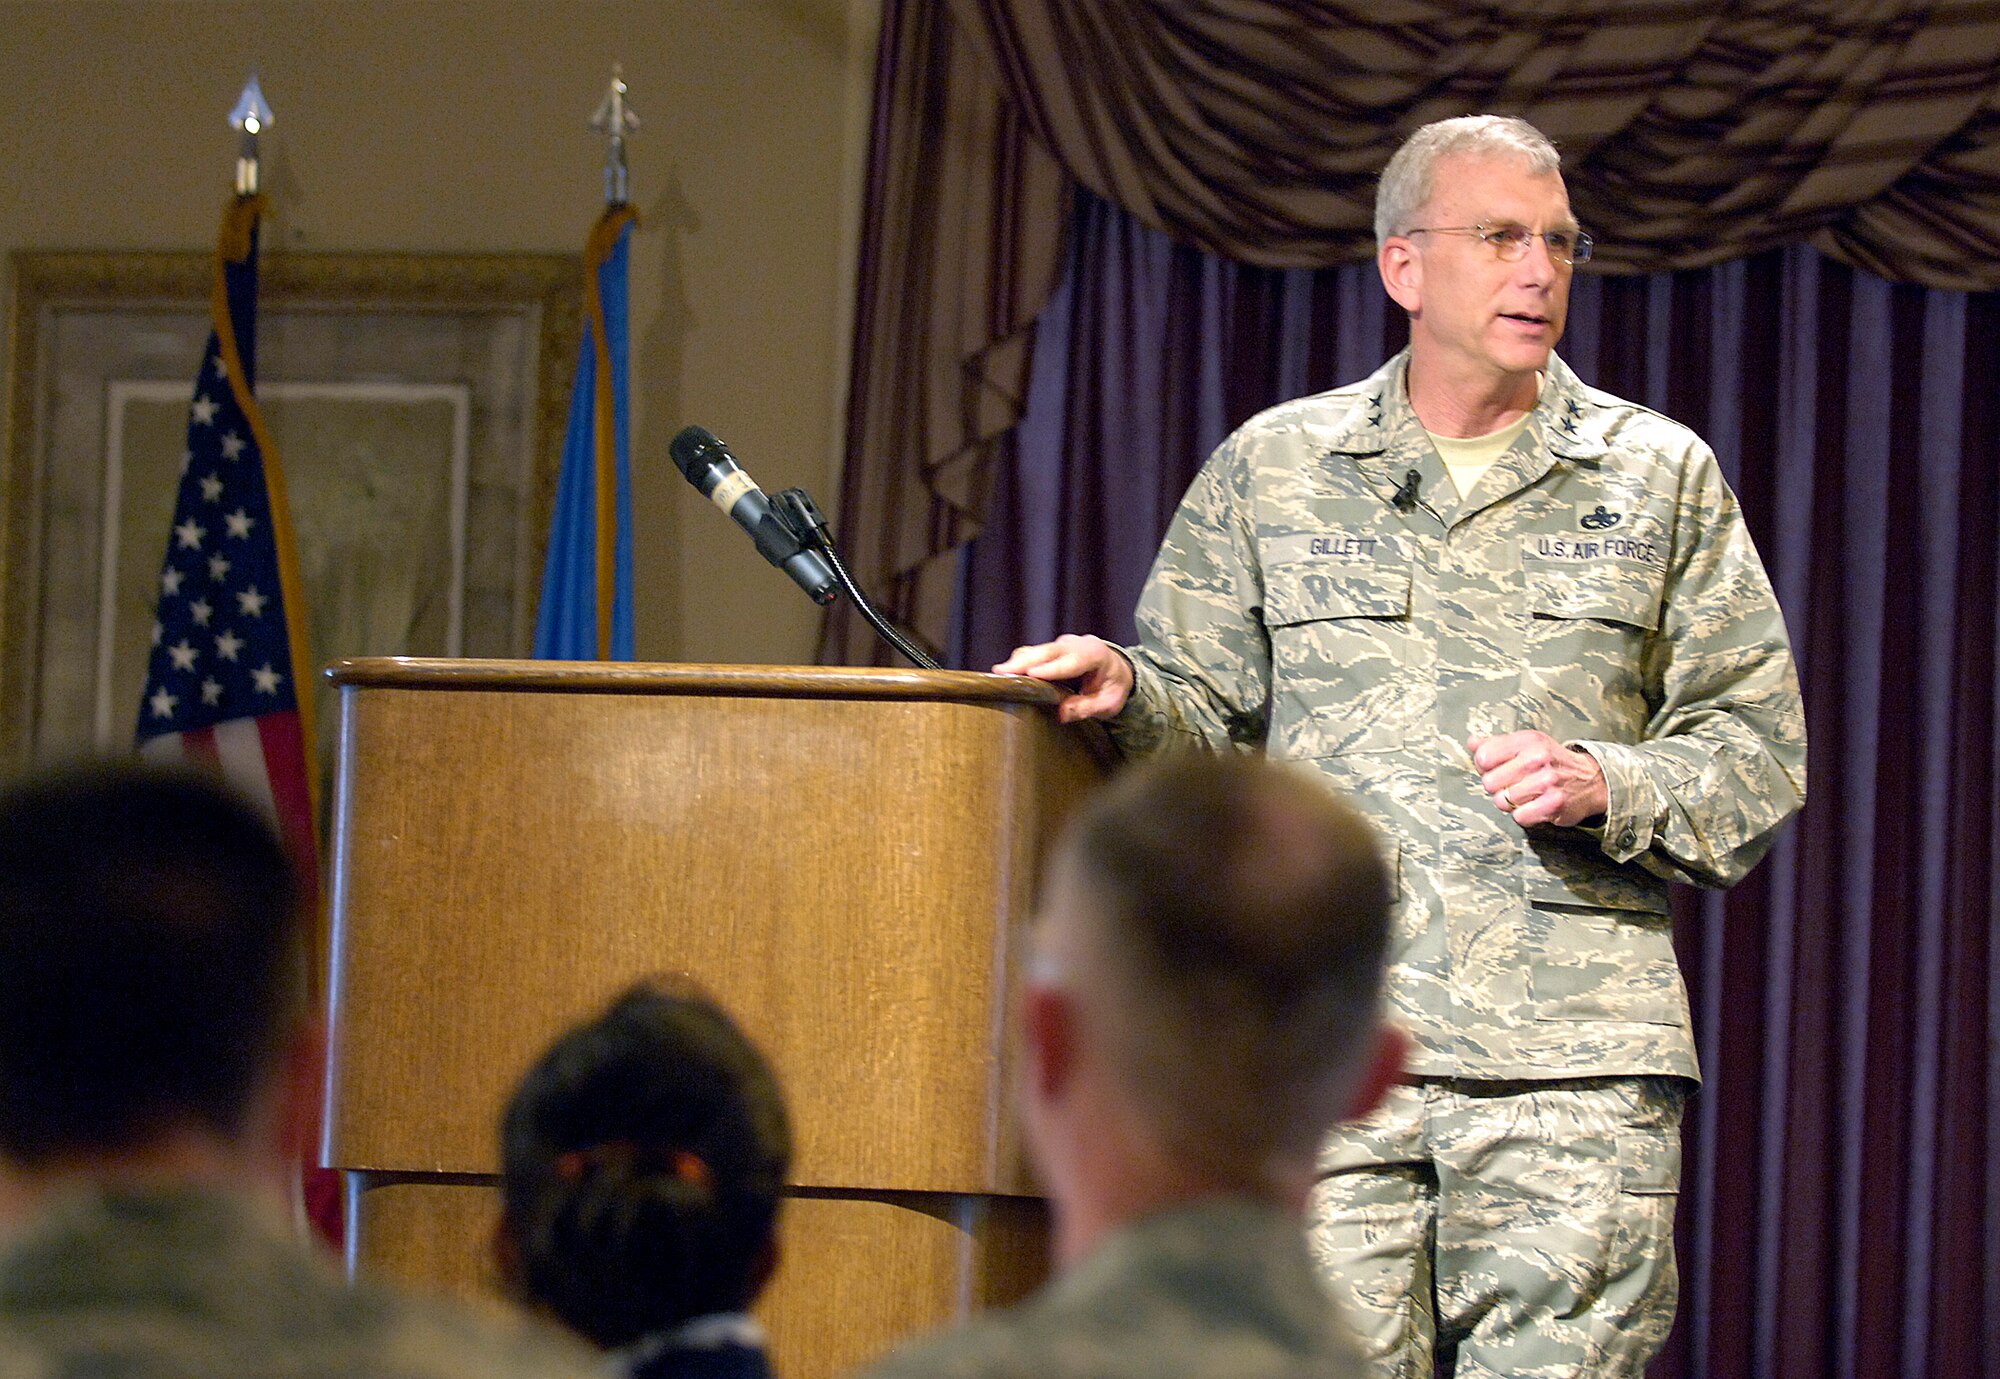 Maj. Gen. P. David Gillett Jr. addresses the crowd at the Tinker Management Association luncheon during his first State of the ALC address April 2 at the Tinker Club. (Air Force photo/Margo Wright) 